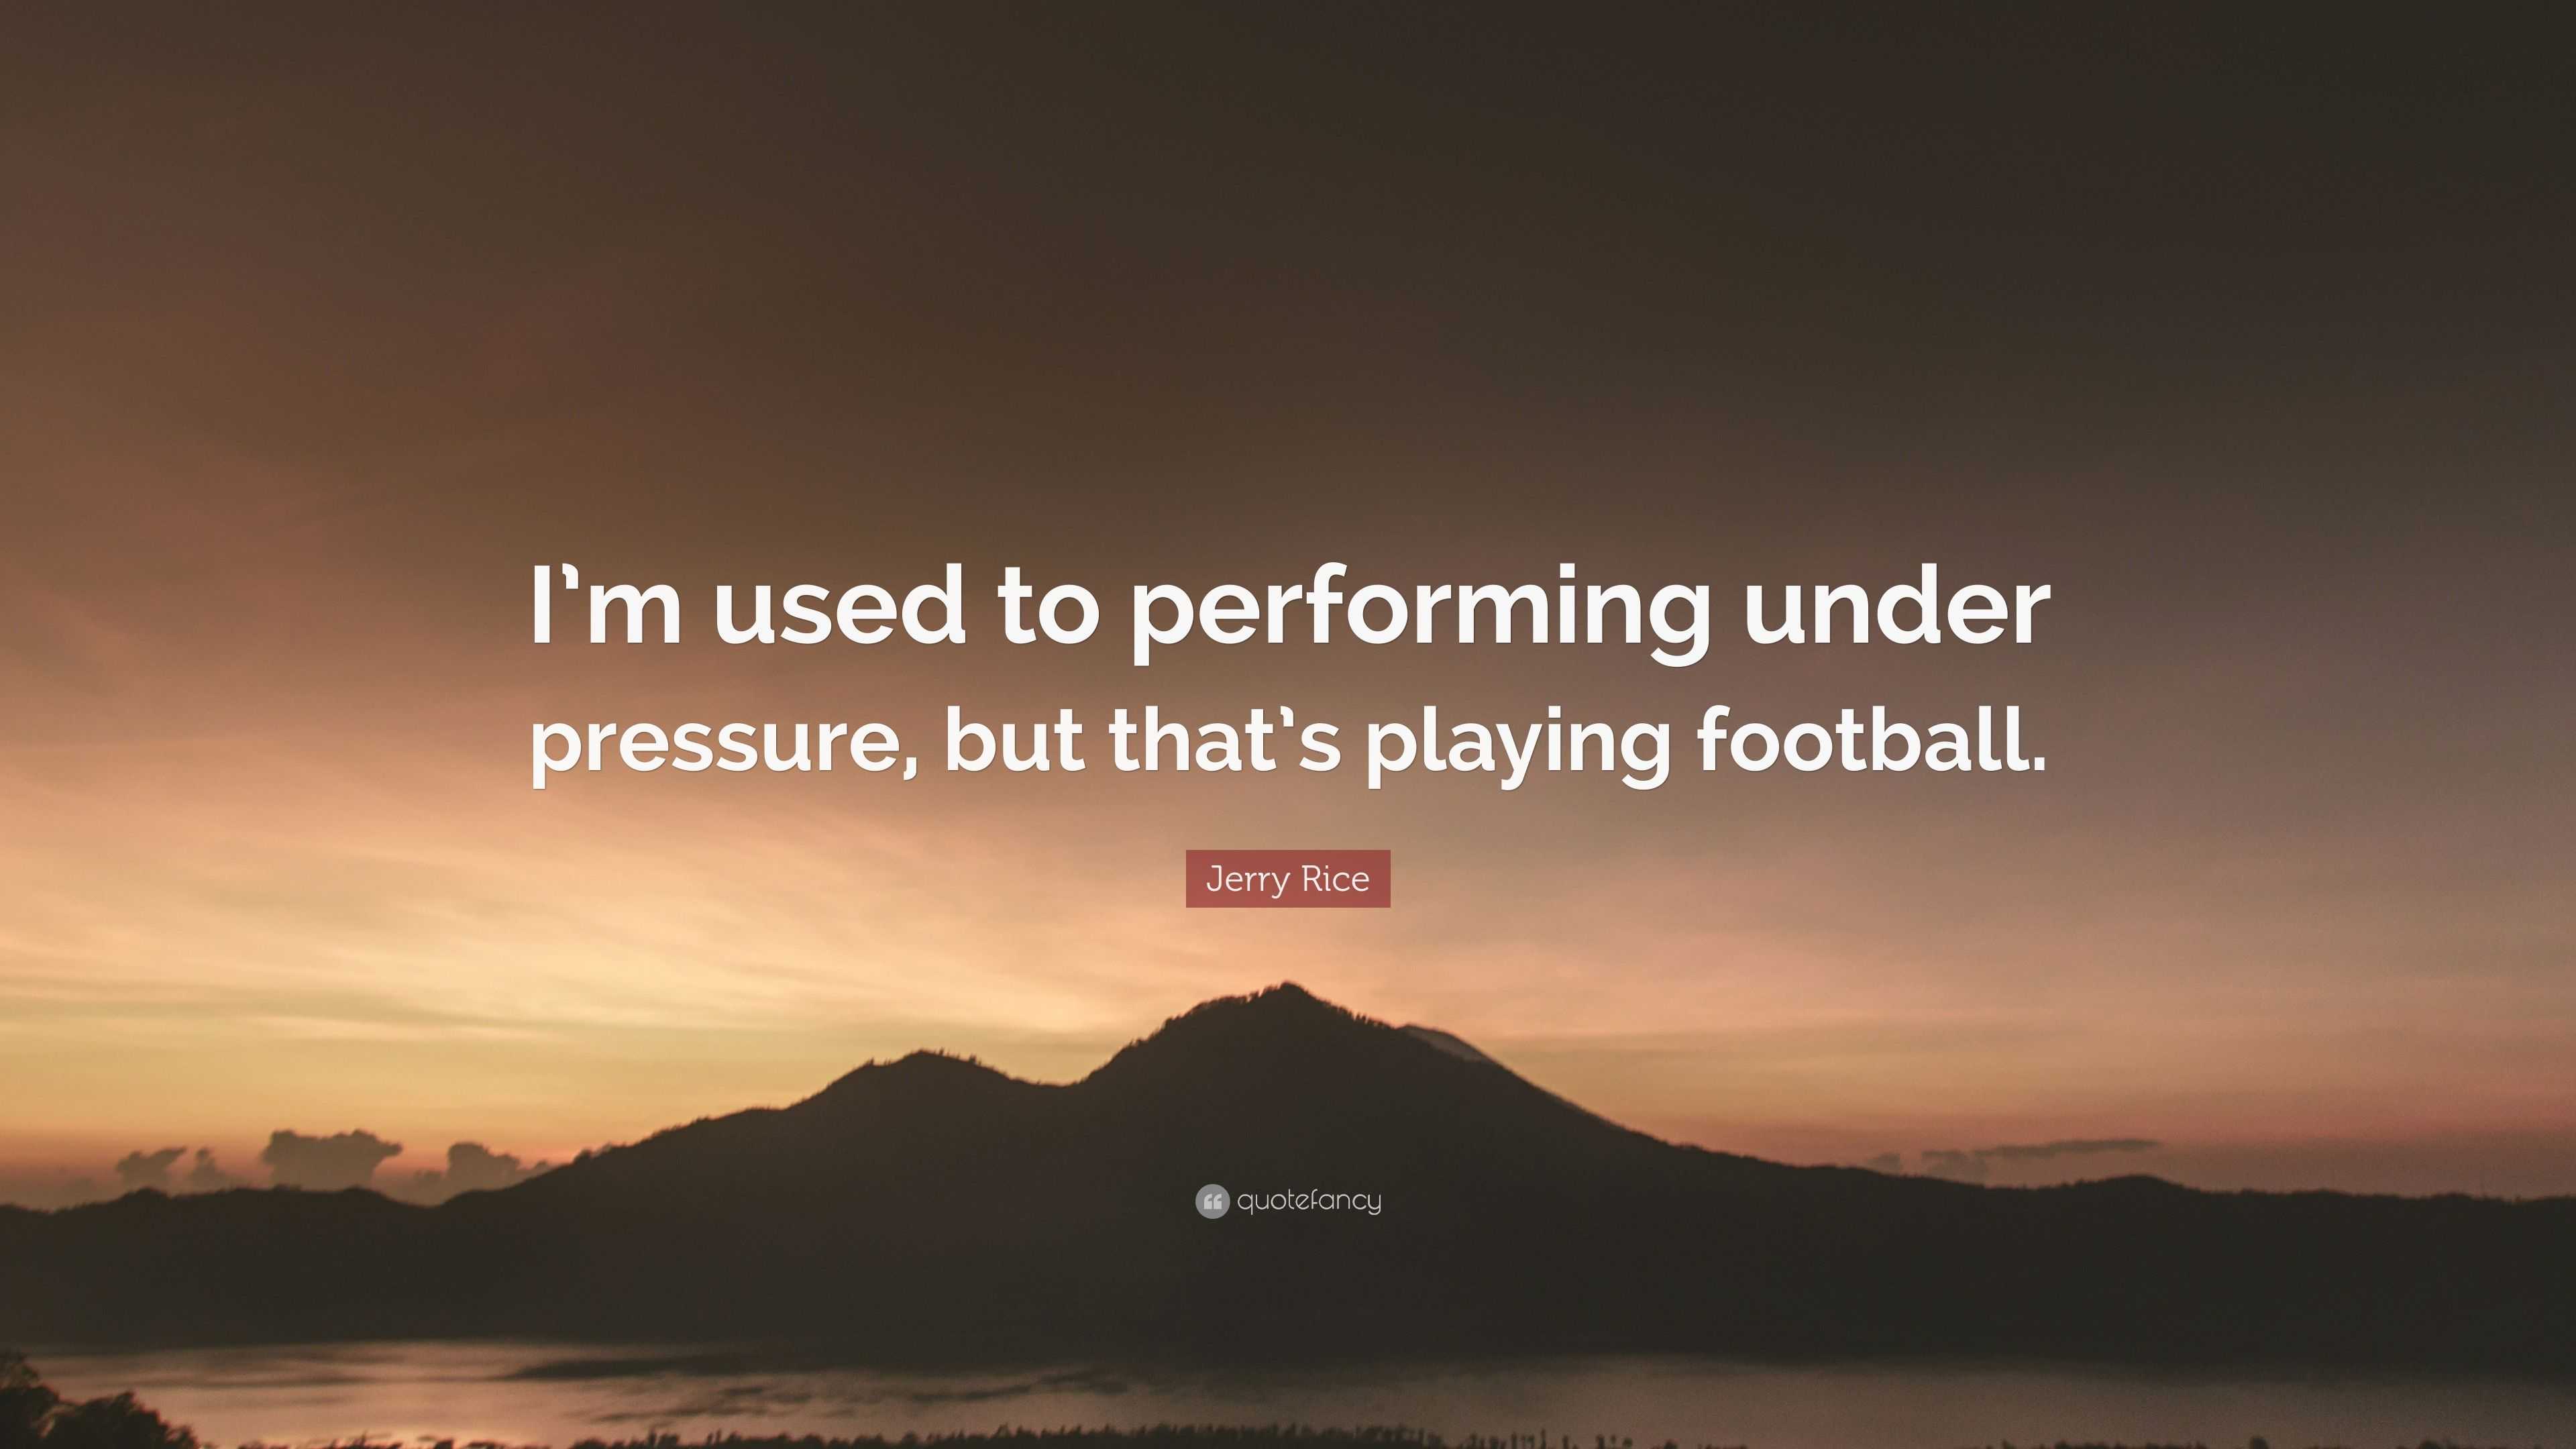 Jerry Rice Quote: “I’m used to performing under pressure, but that’s